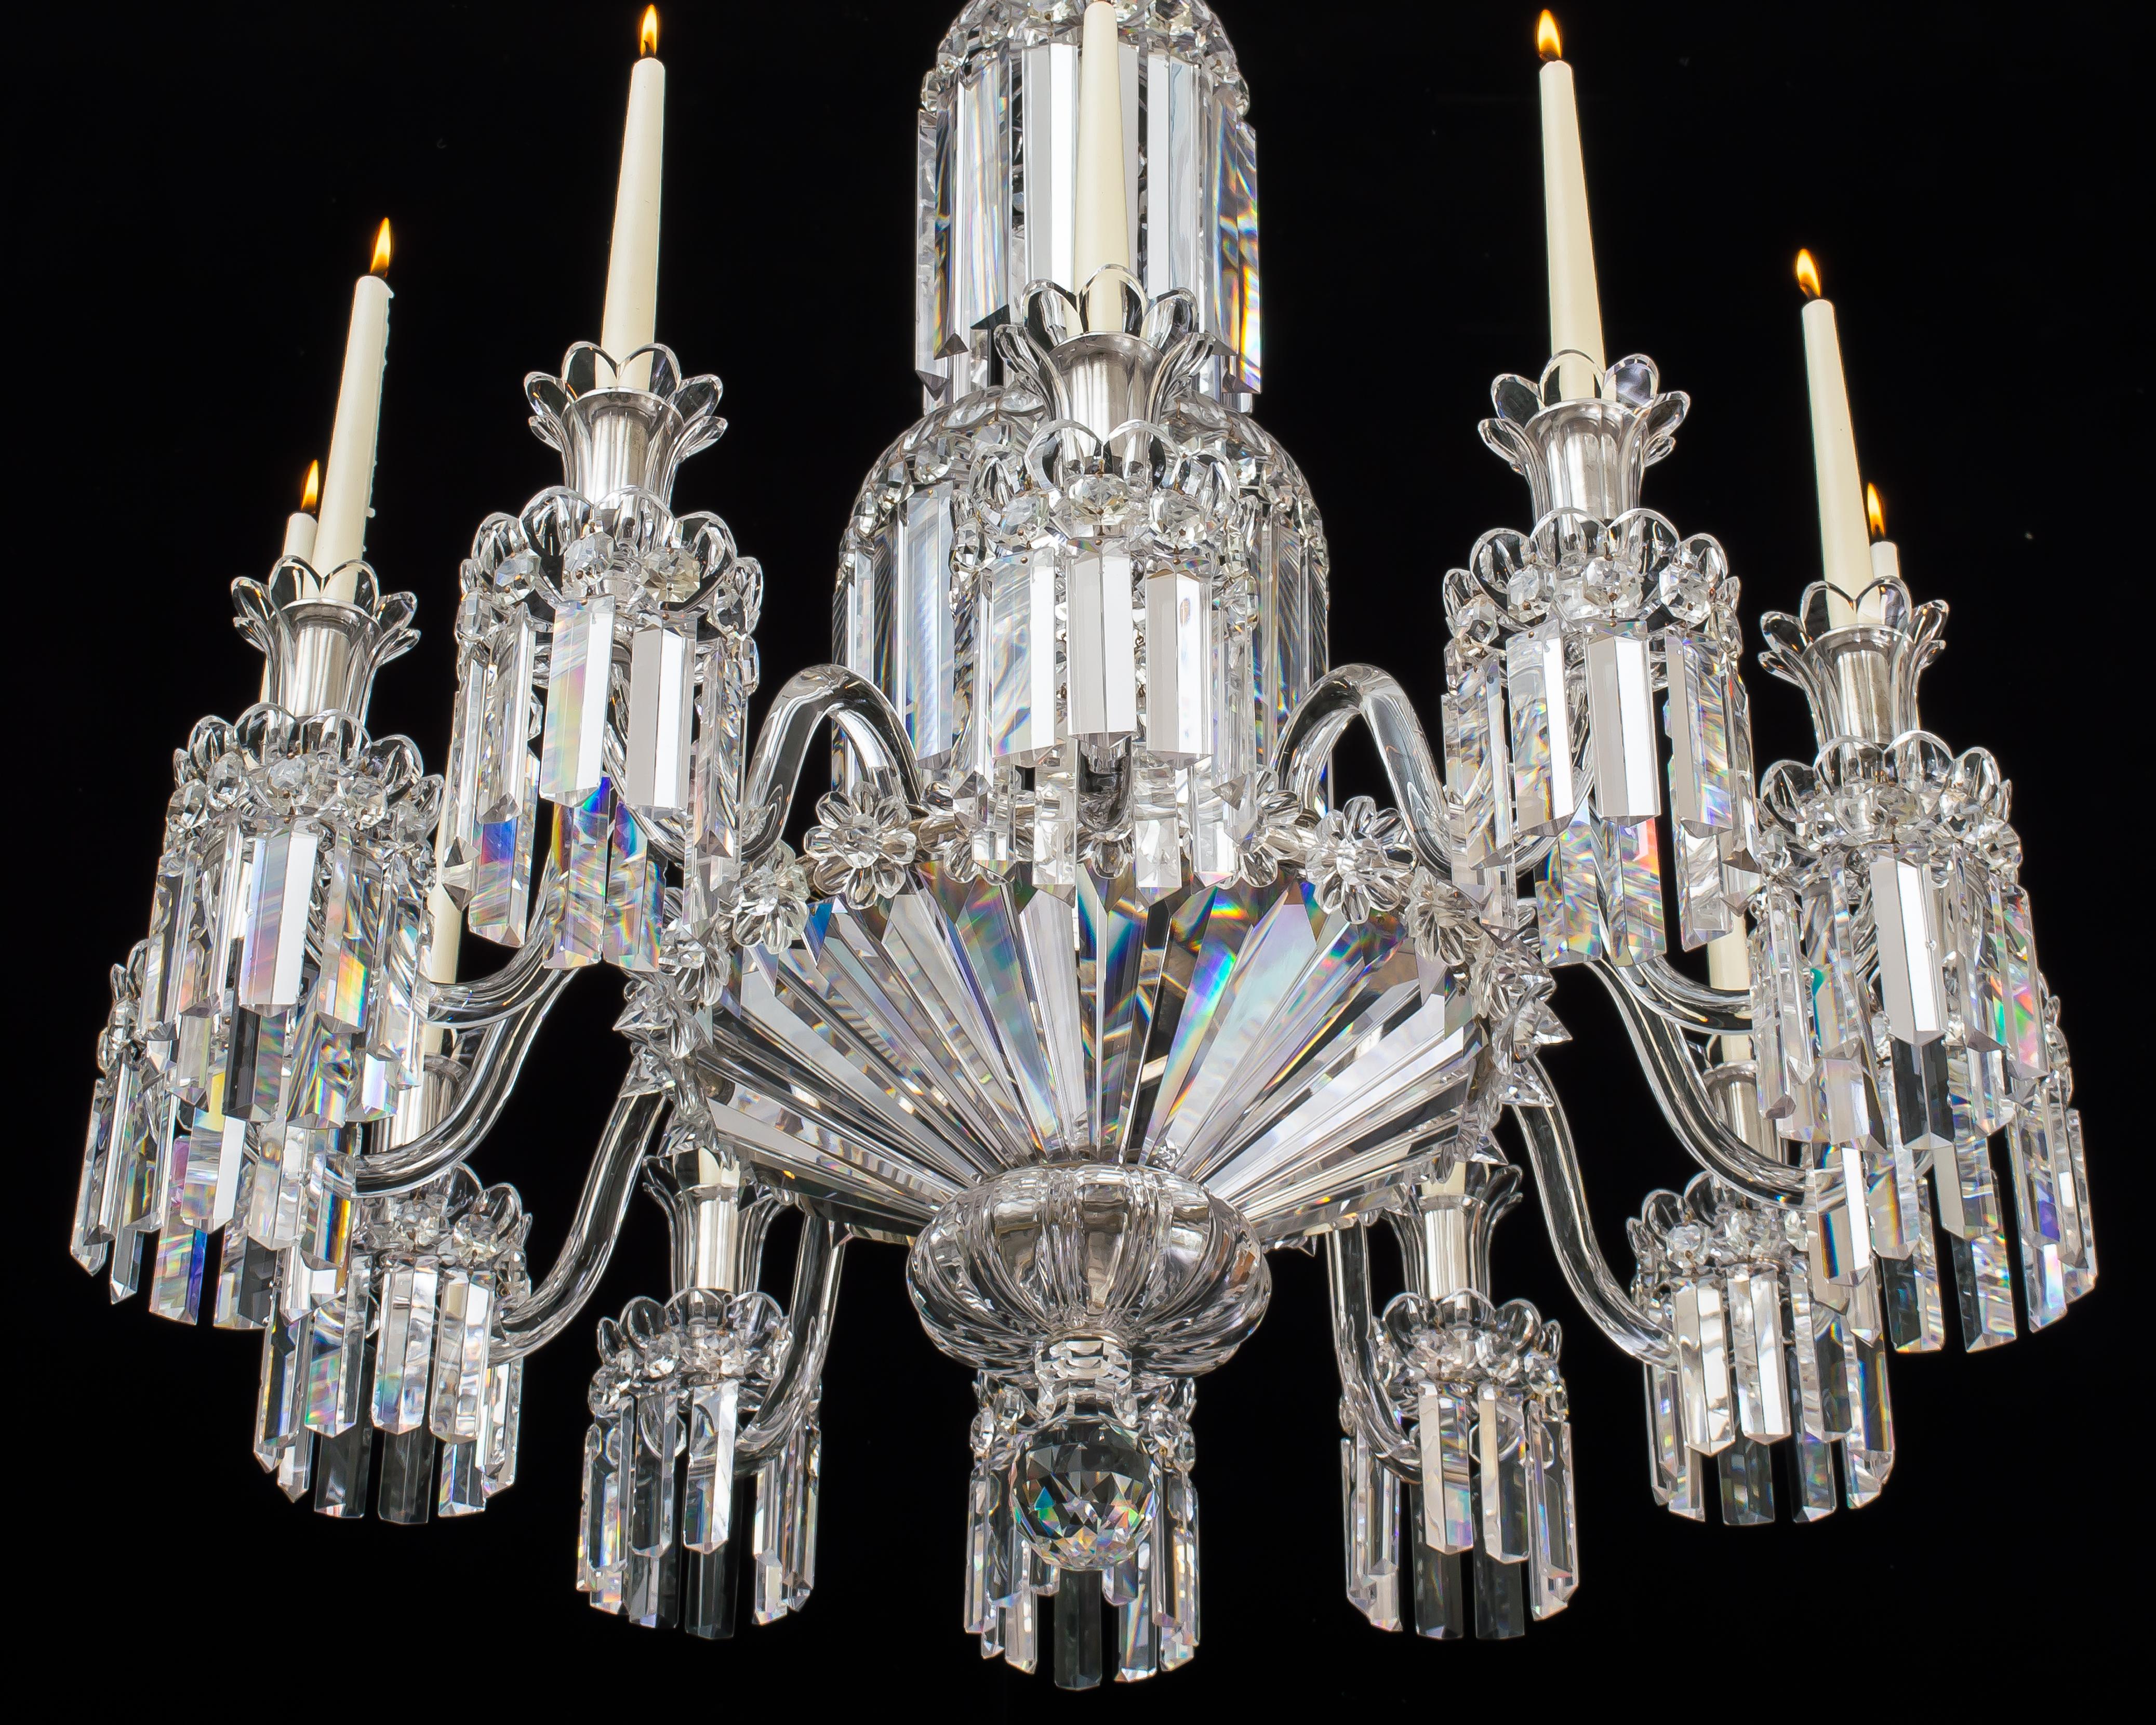 Twelve-Light William IV Crystal Chandelier Attributed to Perry & Co In Good Condition For Sale In Steyning, West sussex